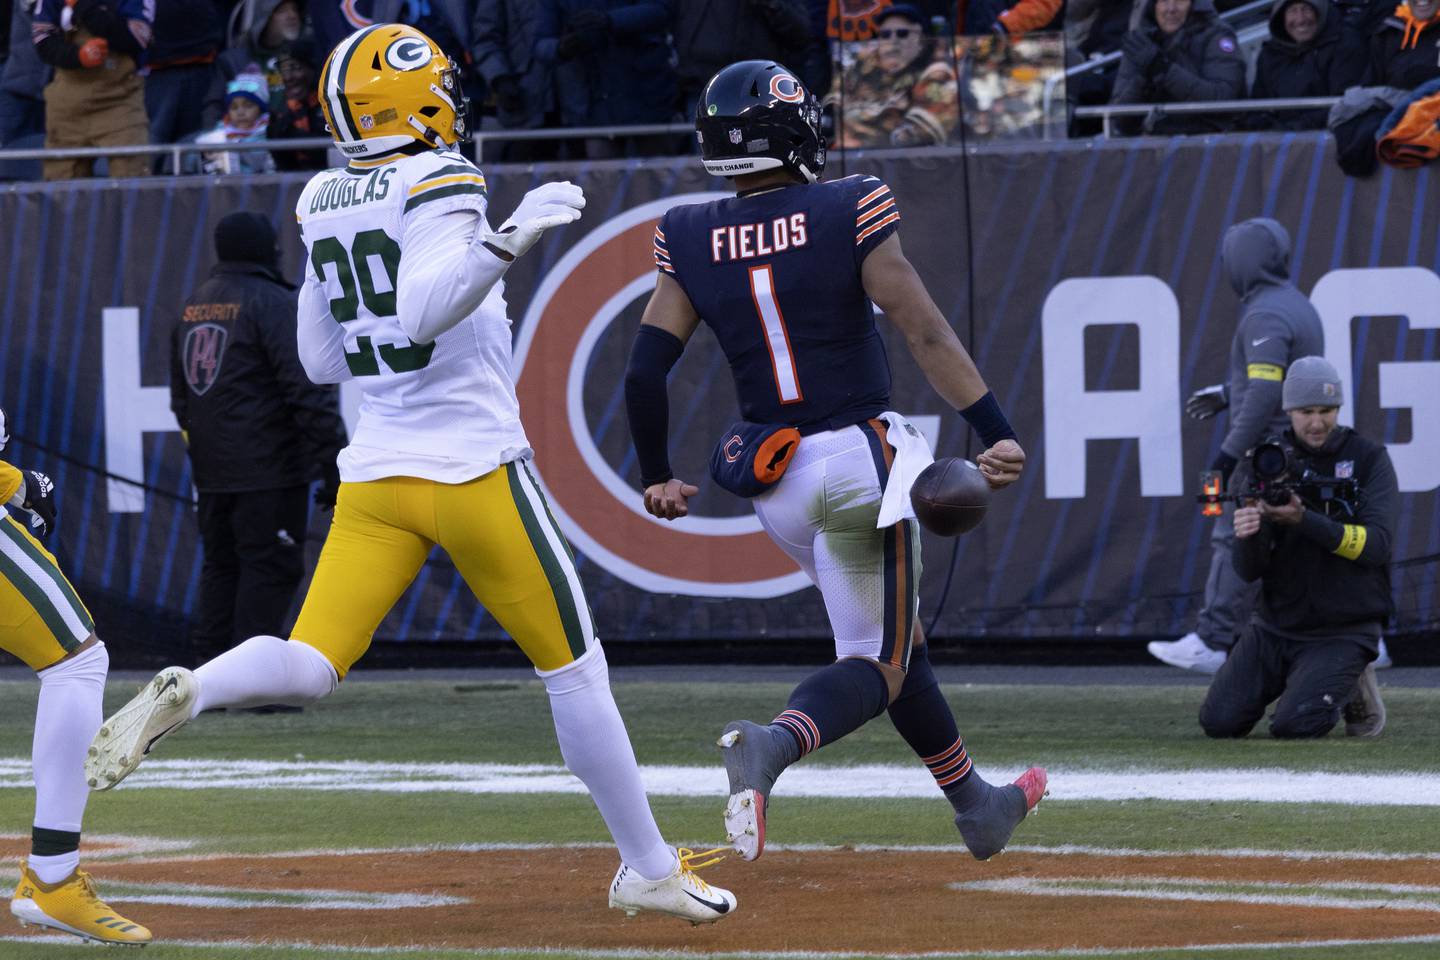 Bears quarterback Justin Fields runs in a 55-yard touchdown during the first quarter at Soldier Field on Dec. 4, 2022.